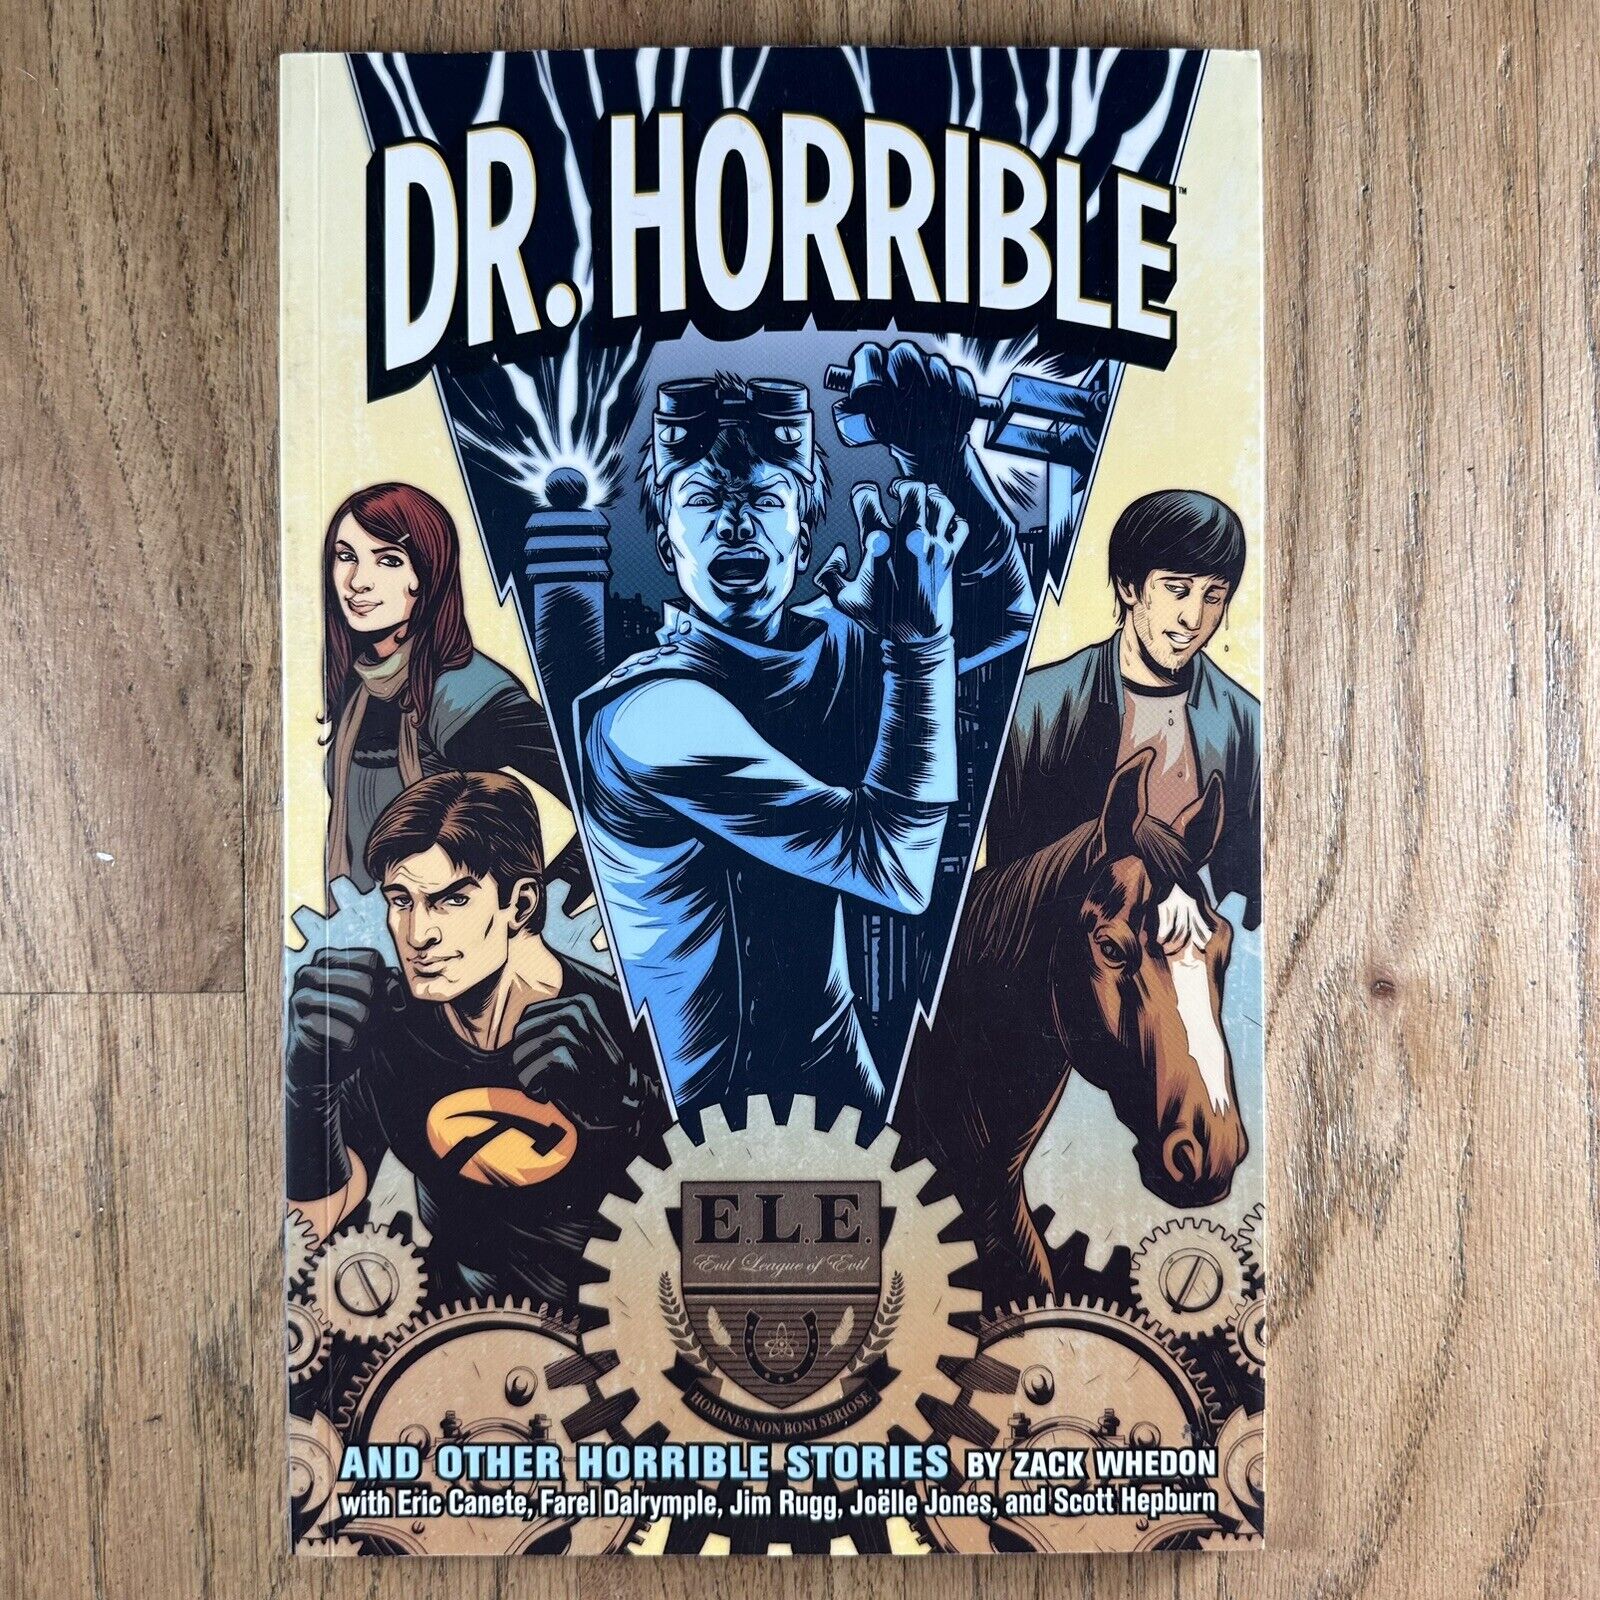 Dr. Horrible And Other Horrible Stories Trade Paperback Dark Horse Comics 2010